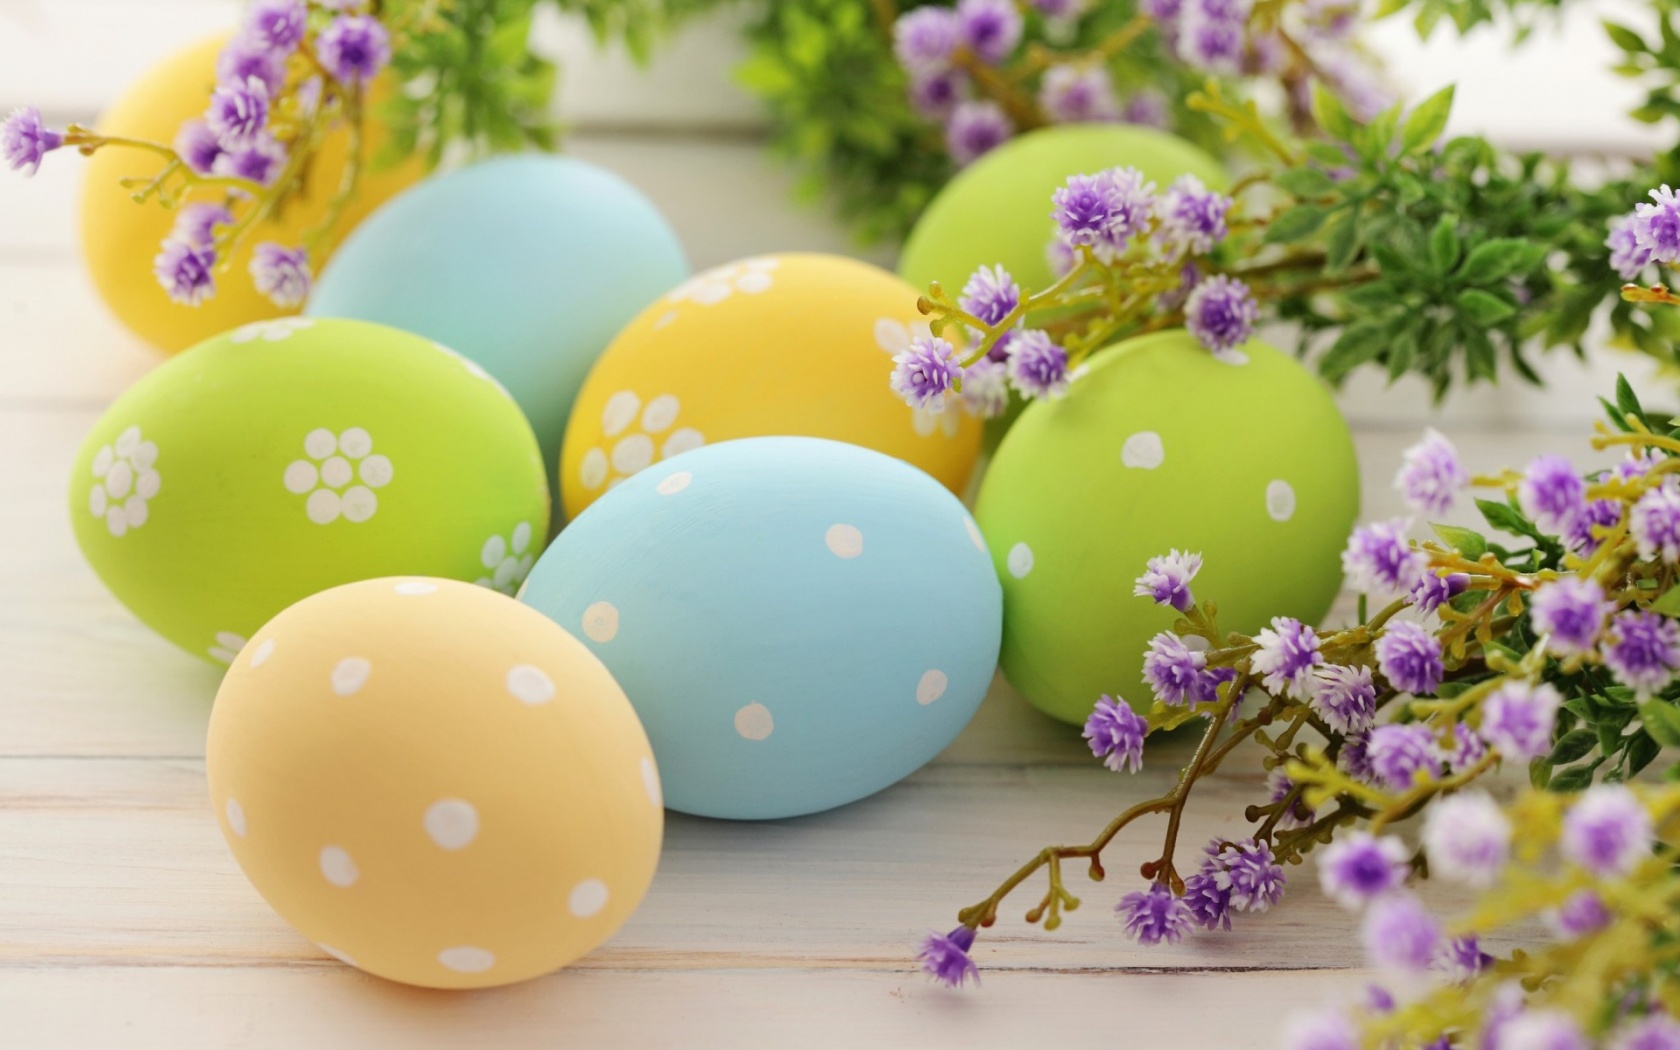 Happy Easter 2014 Wallpapers   1680x1050   364124